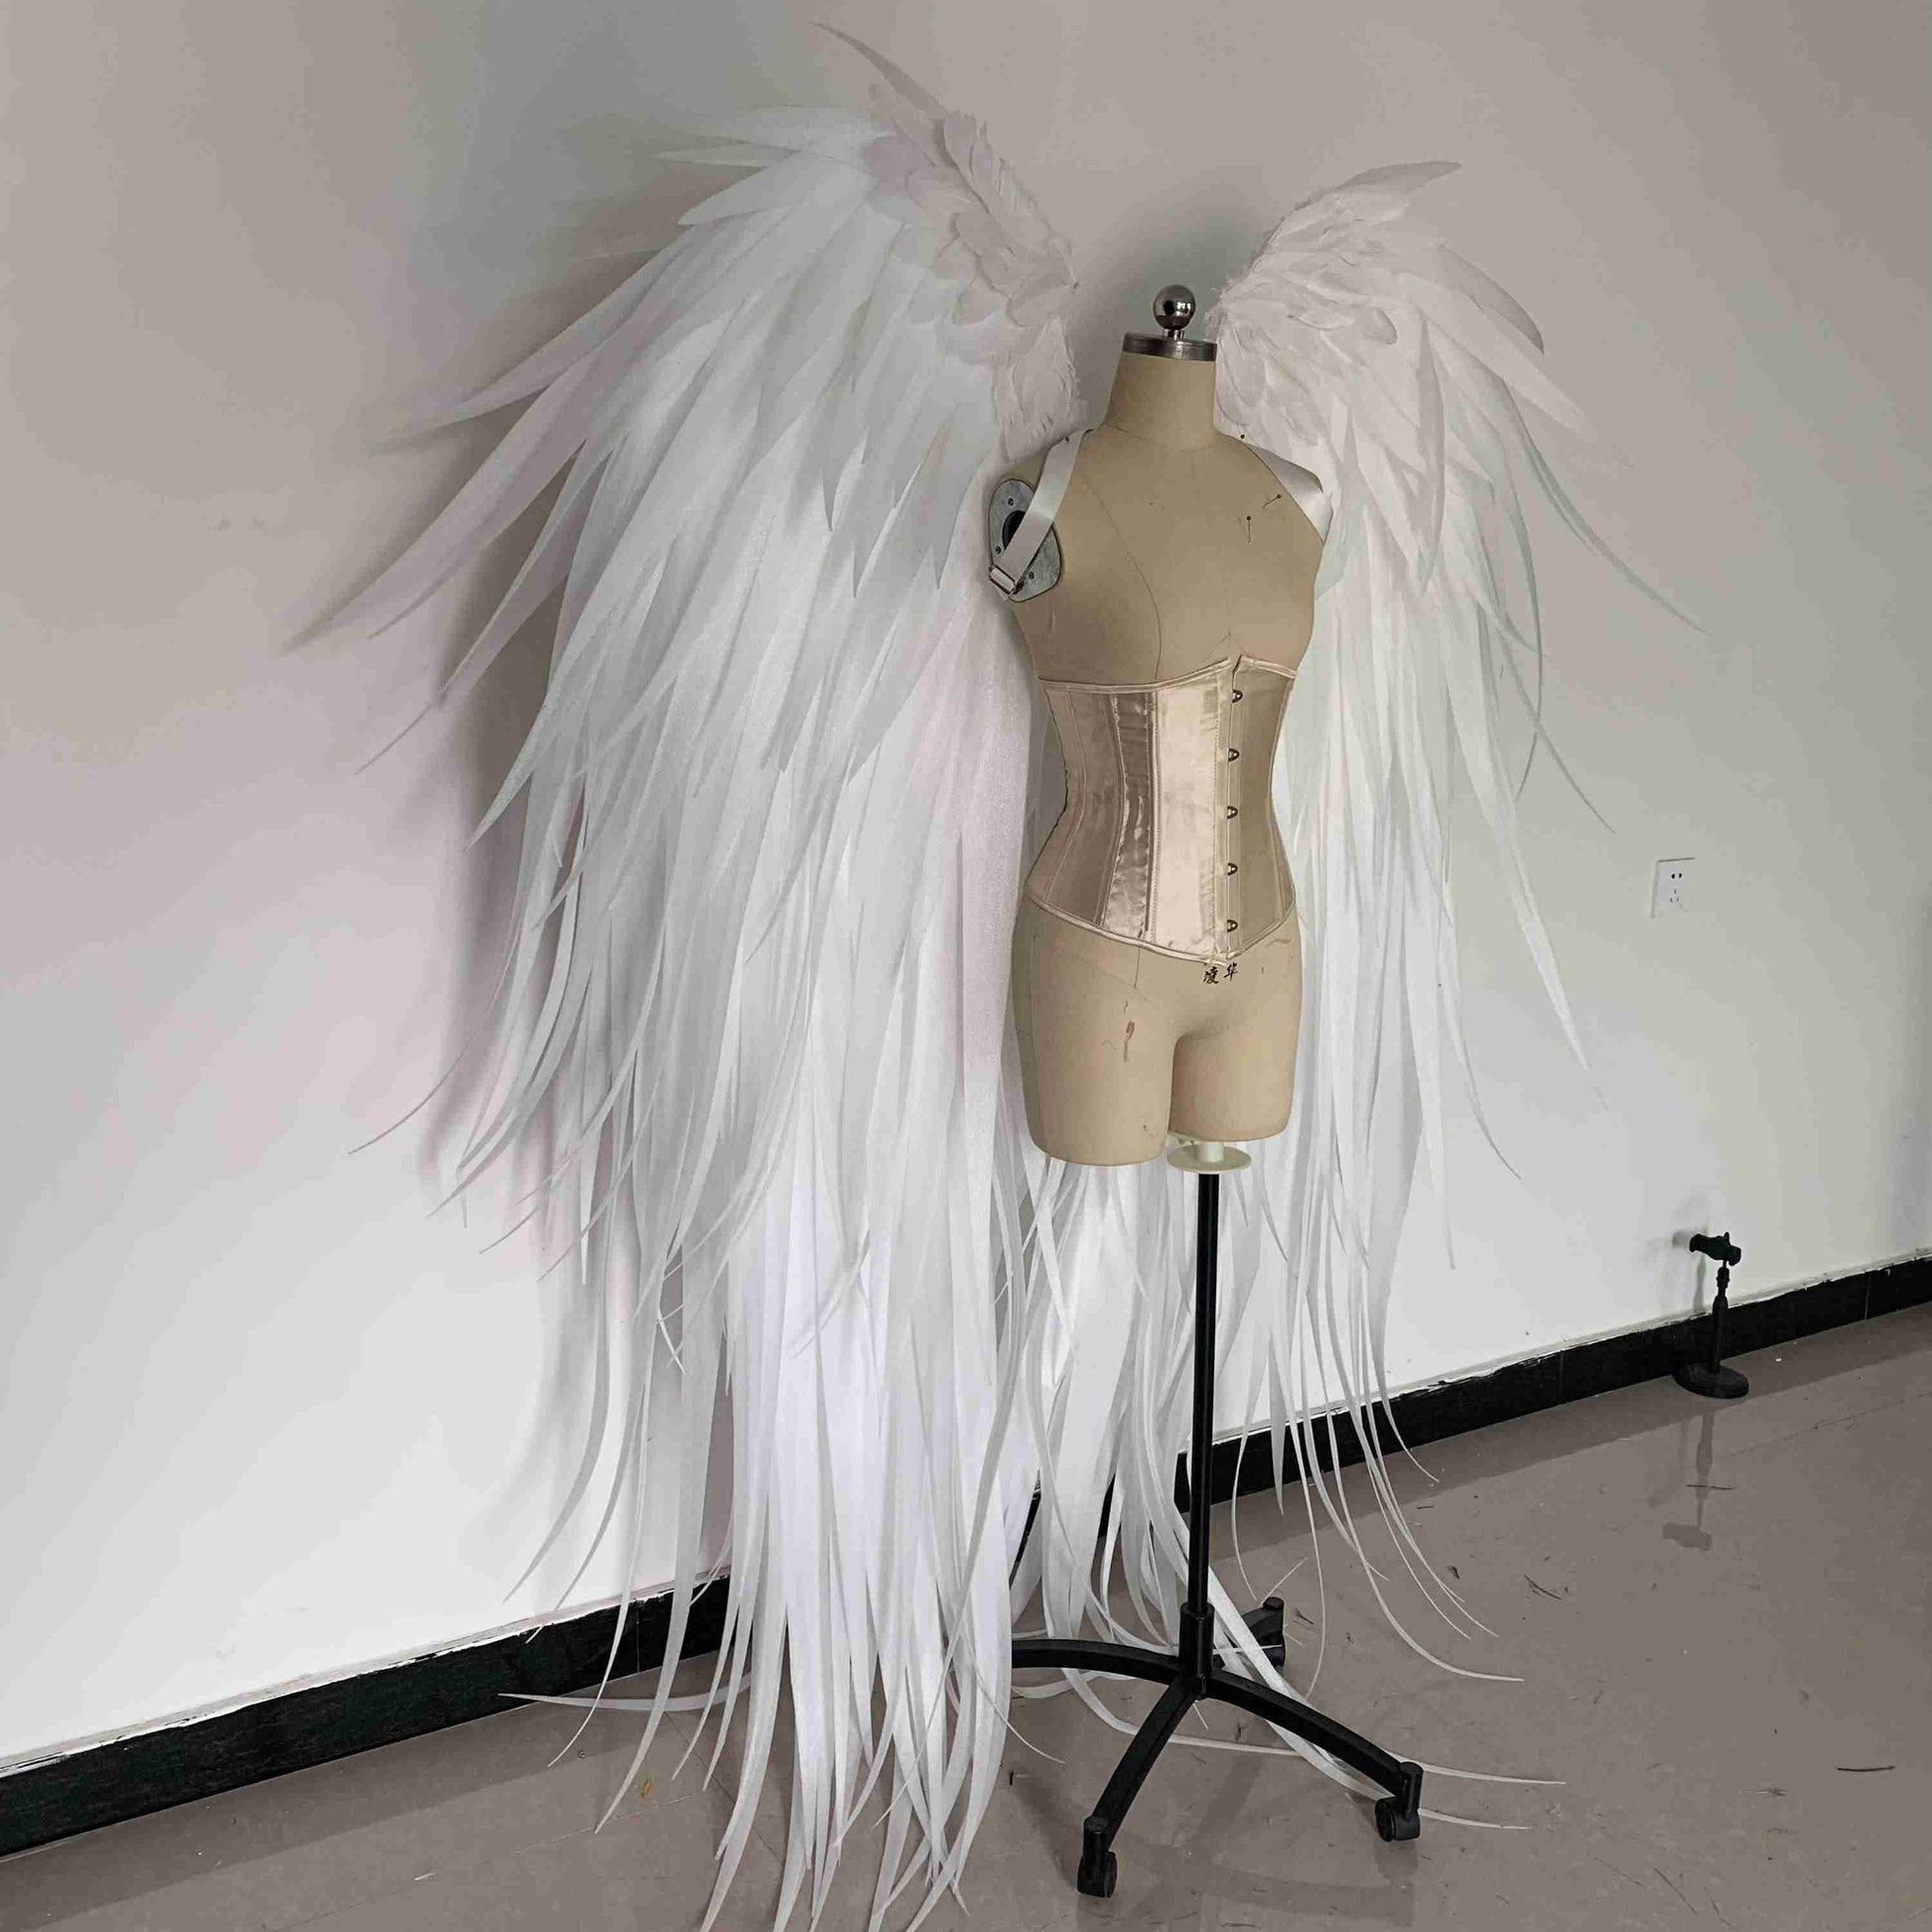 Our white angel wings from the right side. Made from pearl cotton foam and some goose feathers. Wings for angel costume. Suitable for photoshoots.